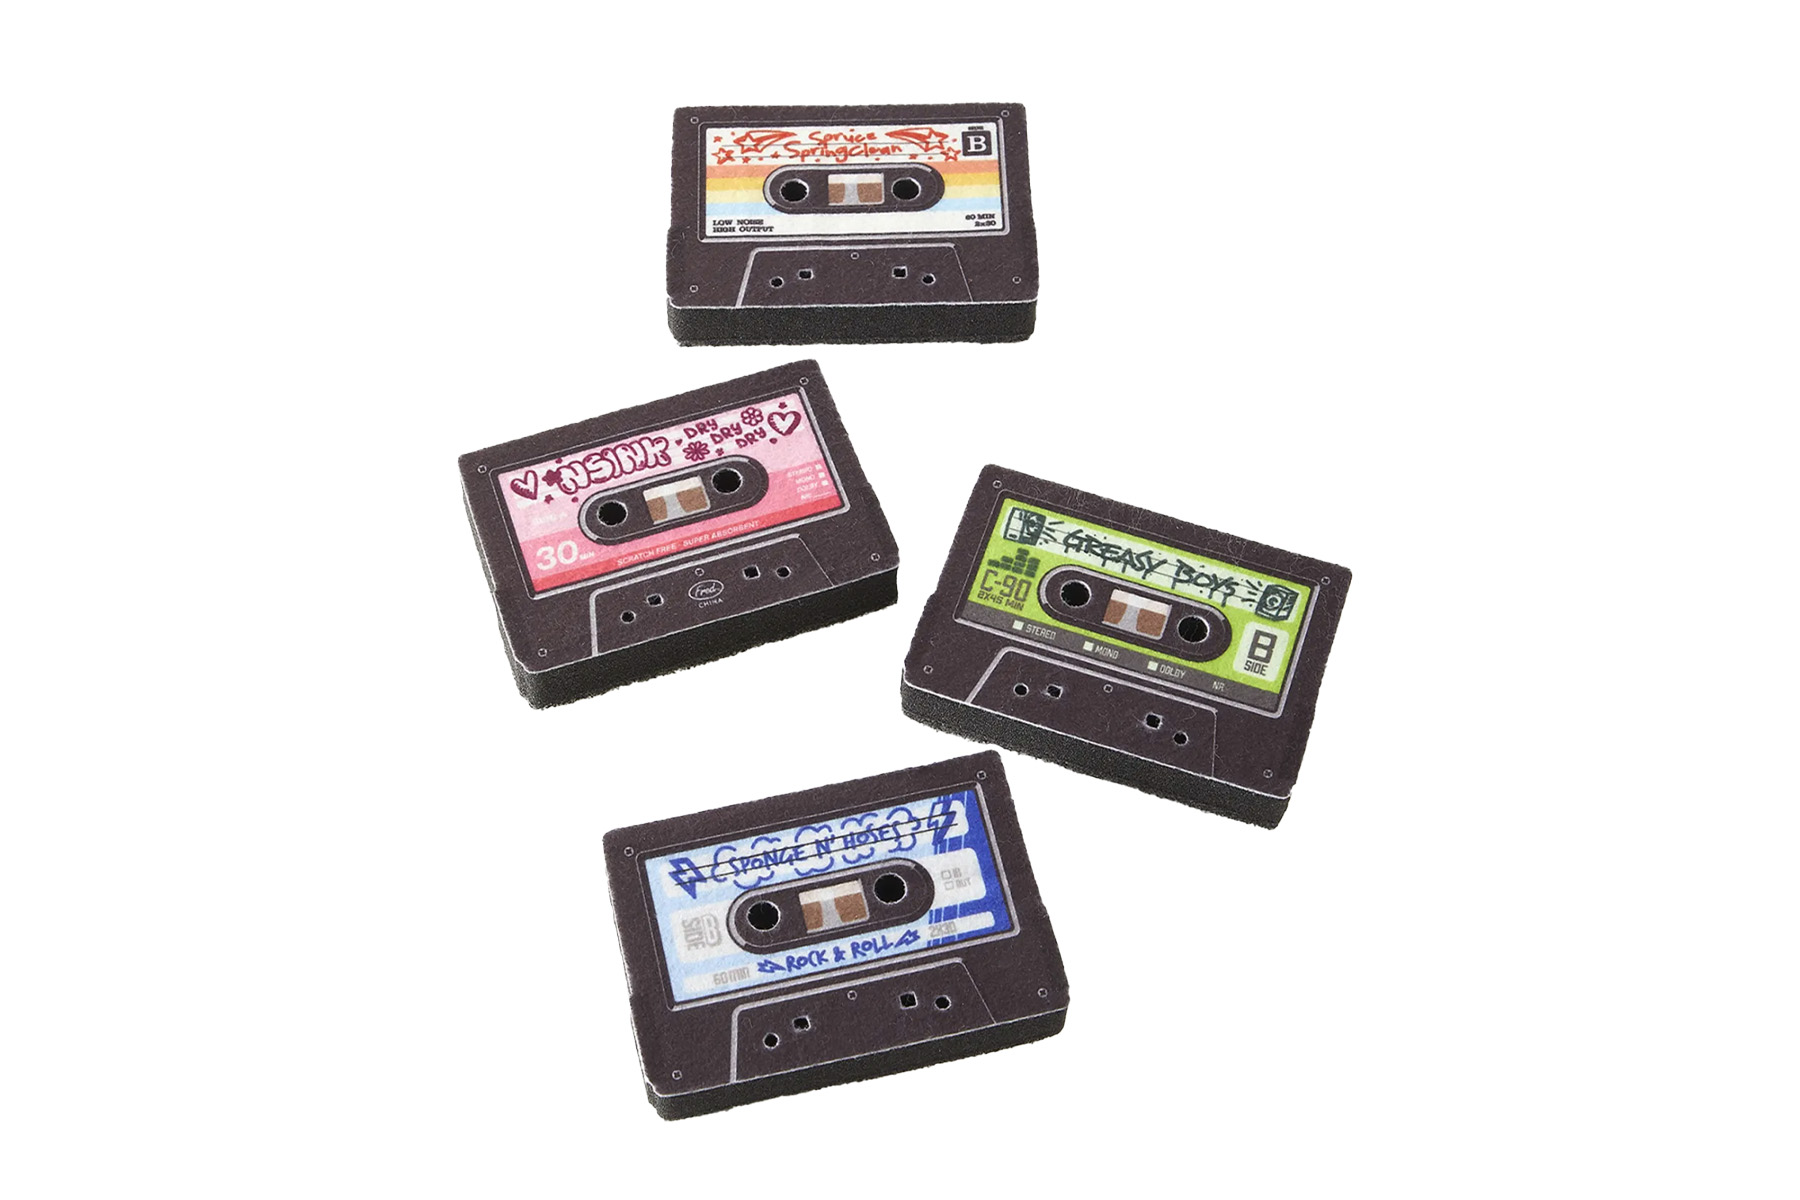 Fred & Friends “Mix Tapes” sponges